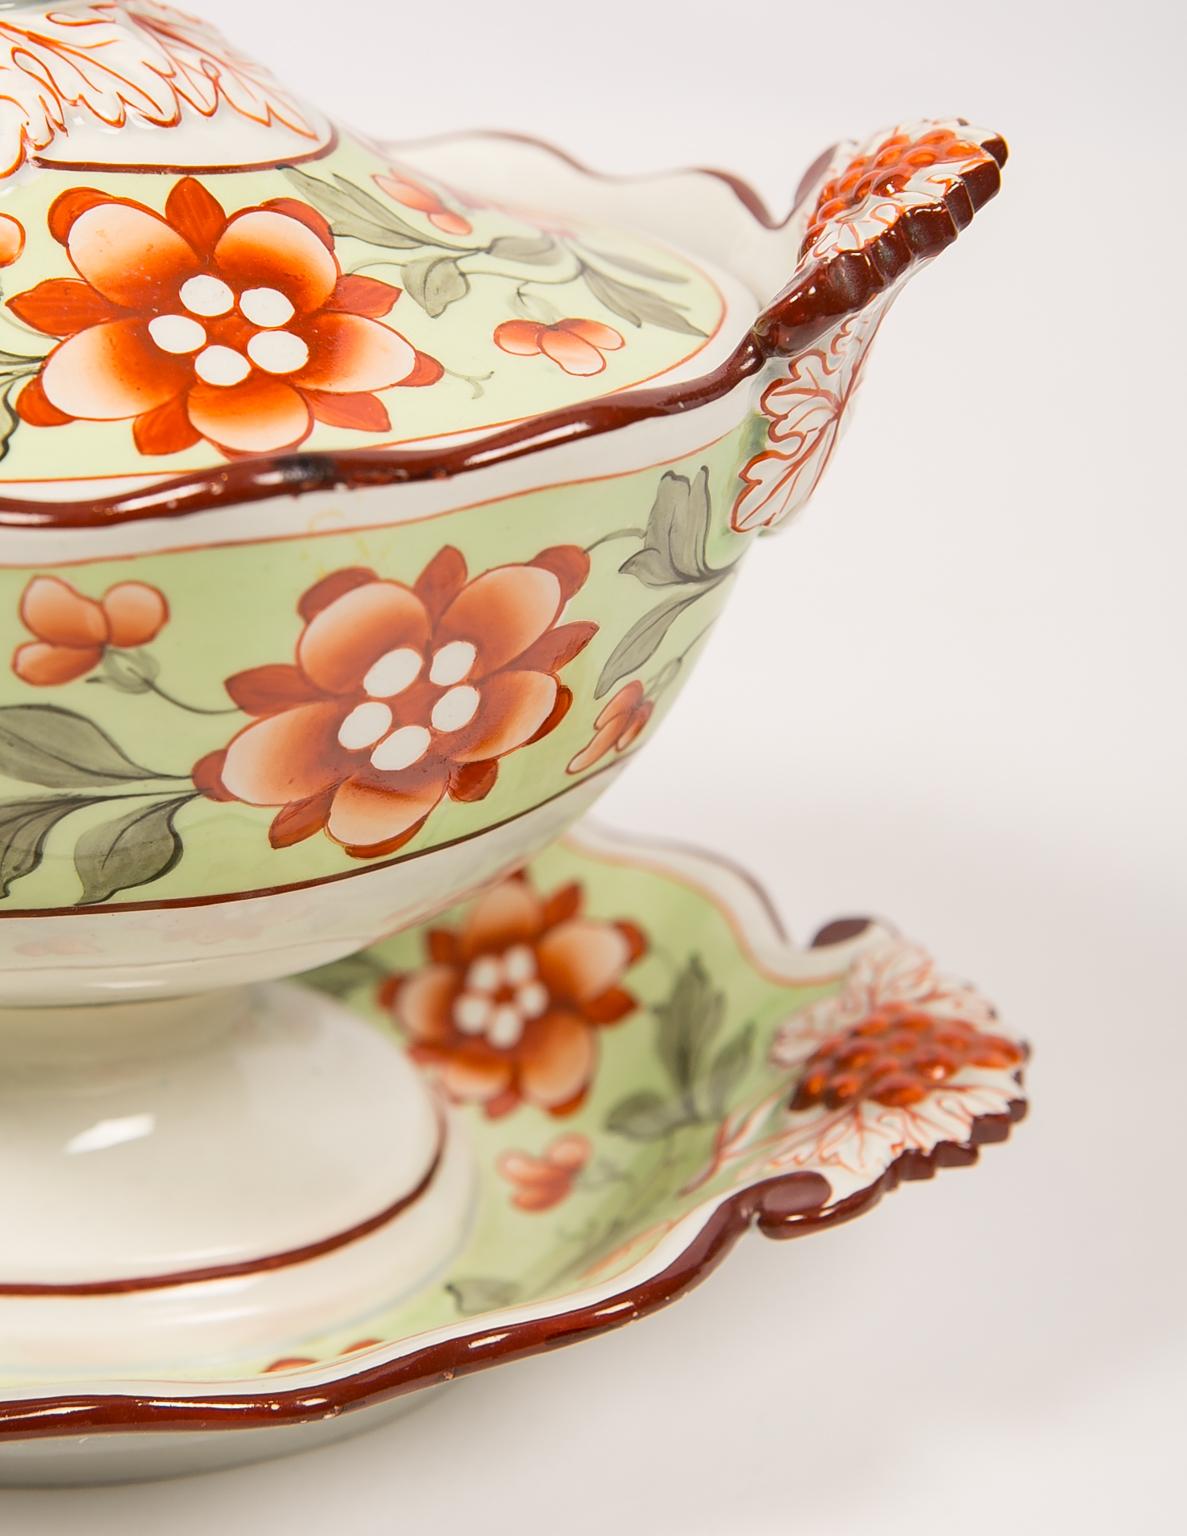 Hand-Painted Antique Tureen Painted in Soft Green with Orange Blossoms & Berries England 1830